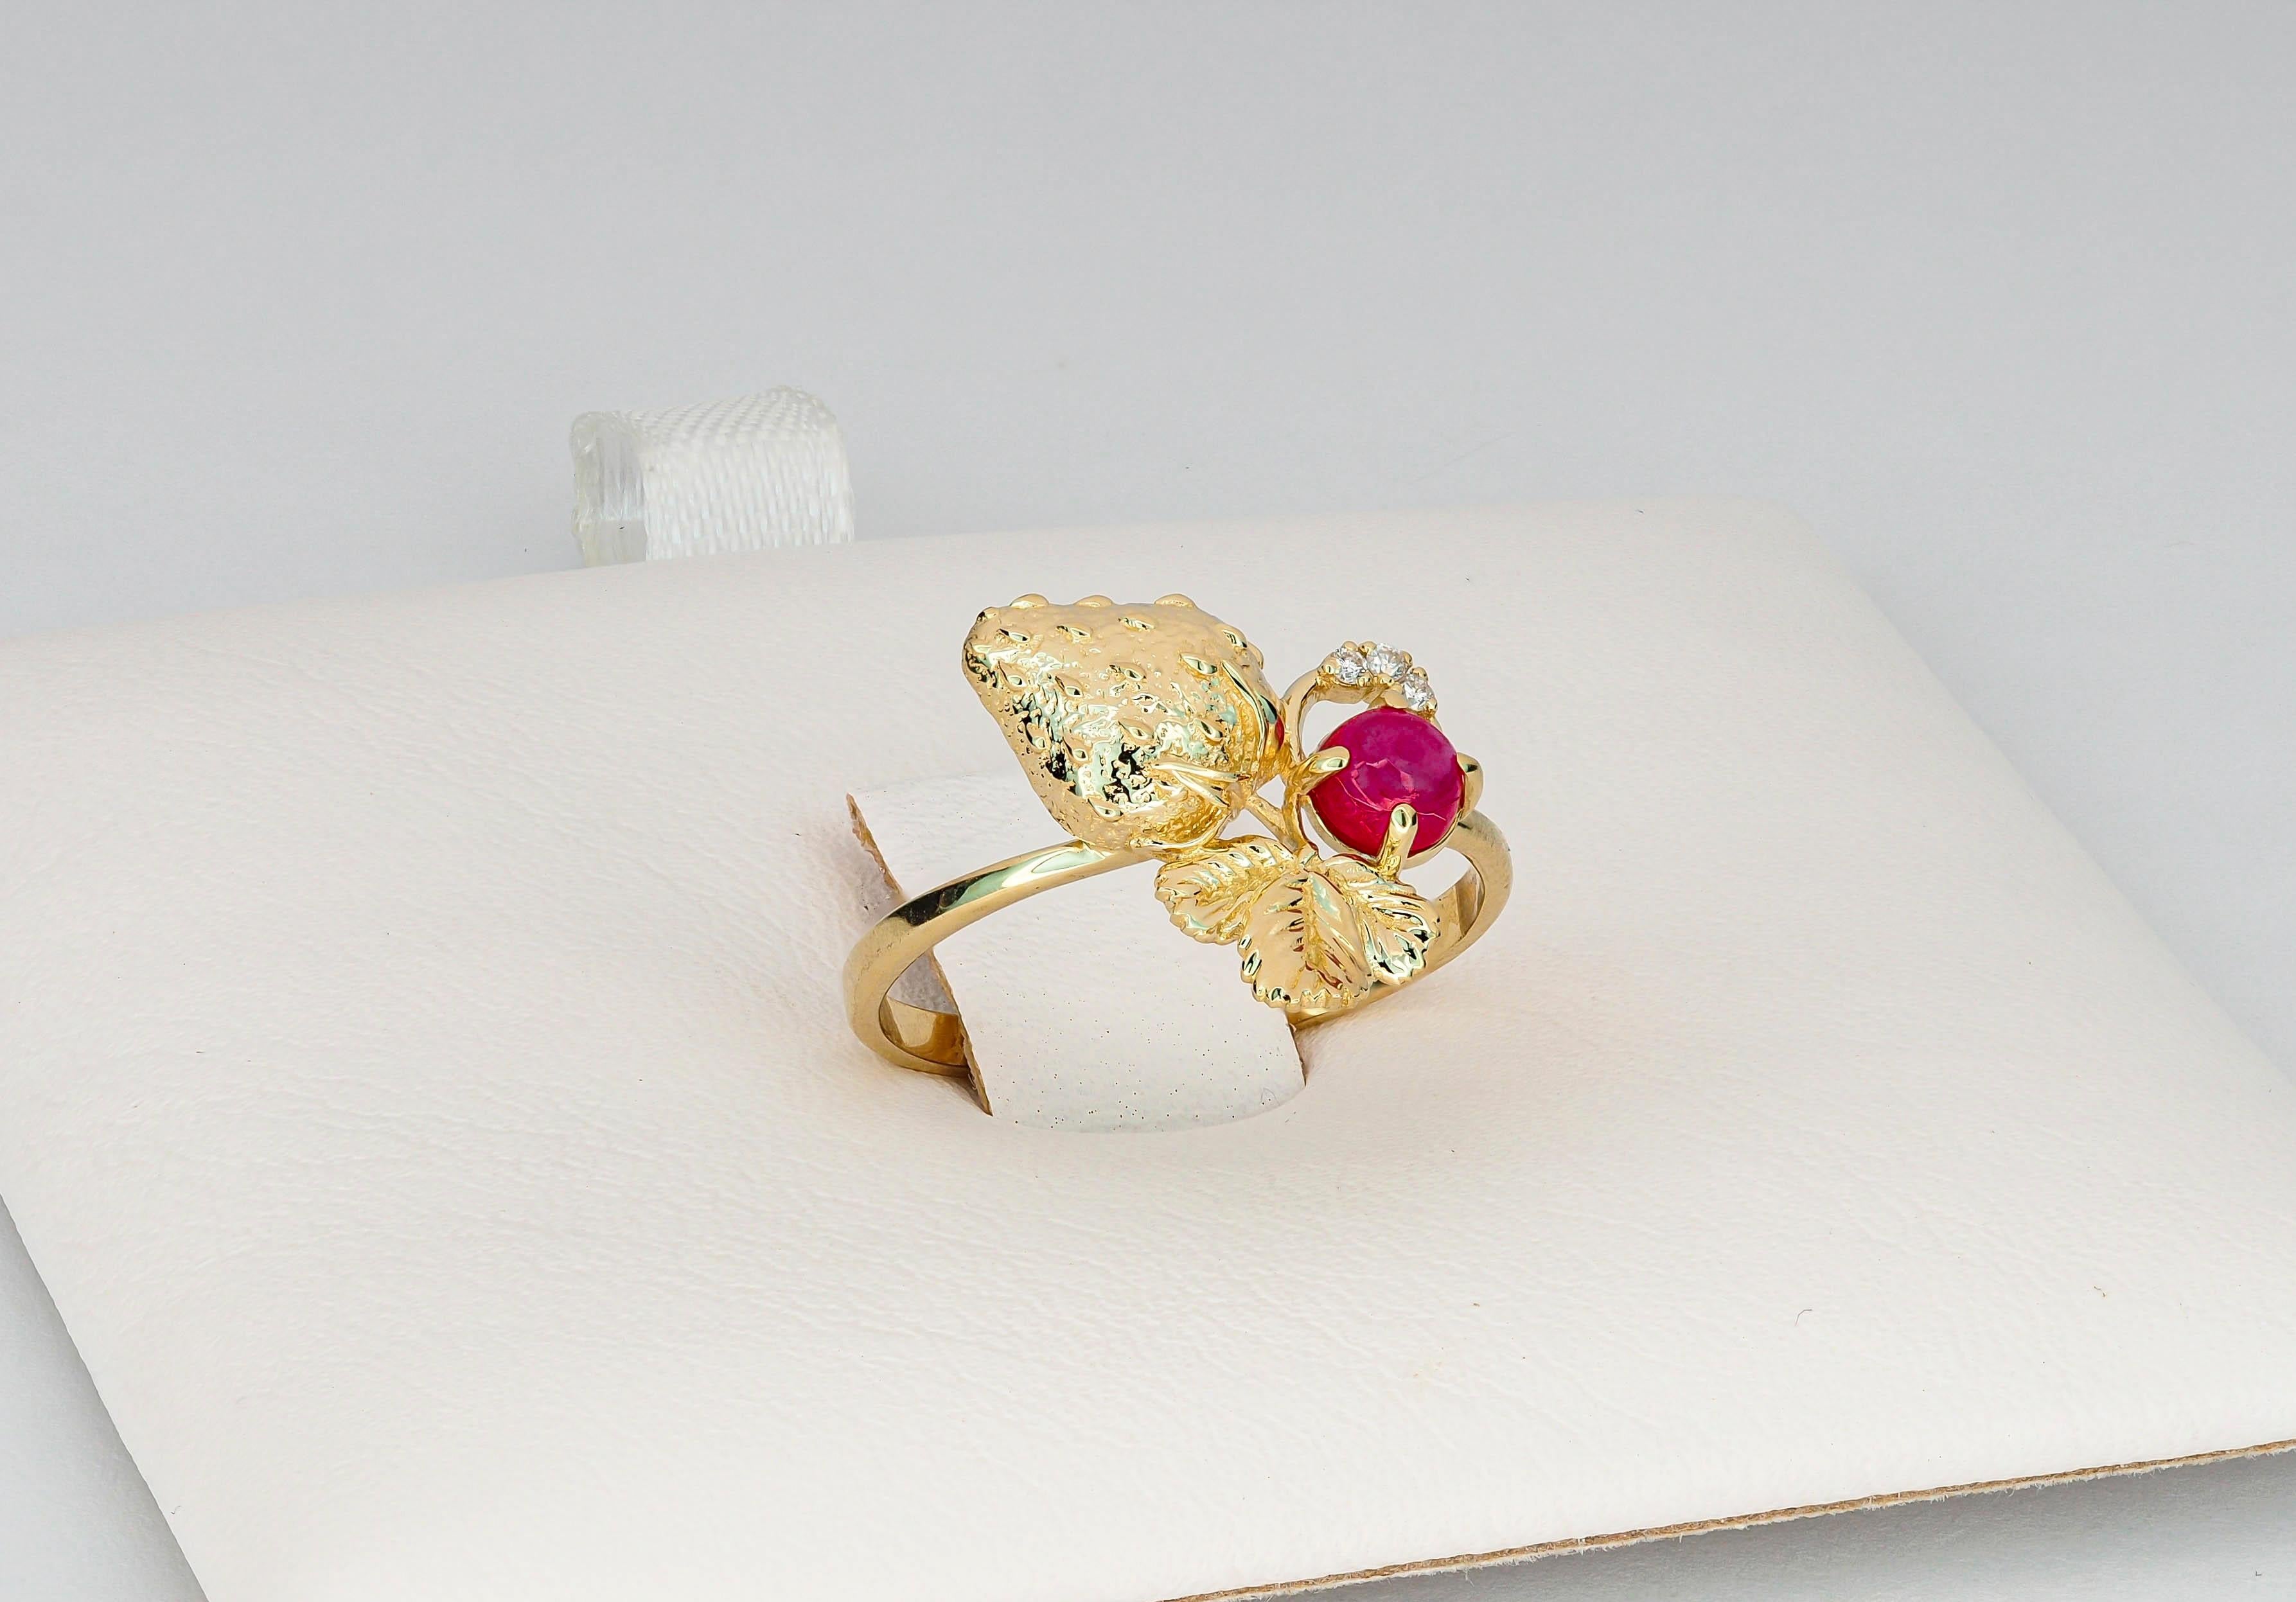 For Sale:  Ruby 14k gold ring. Strawberry ring! 6